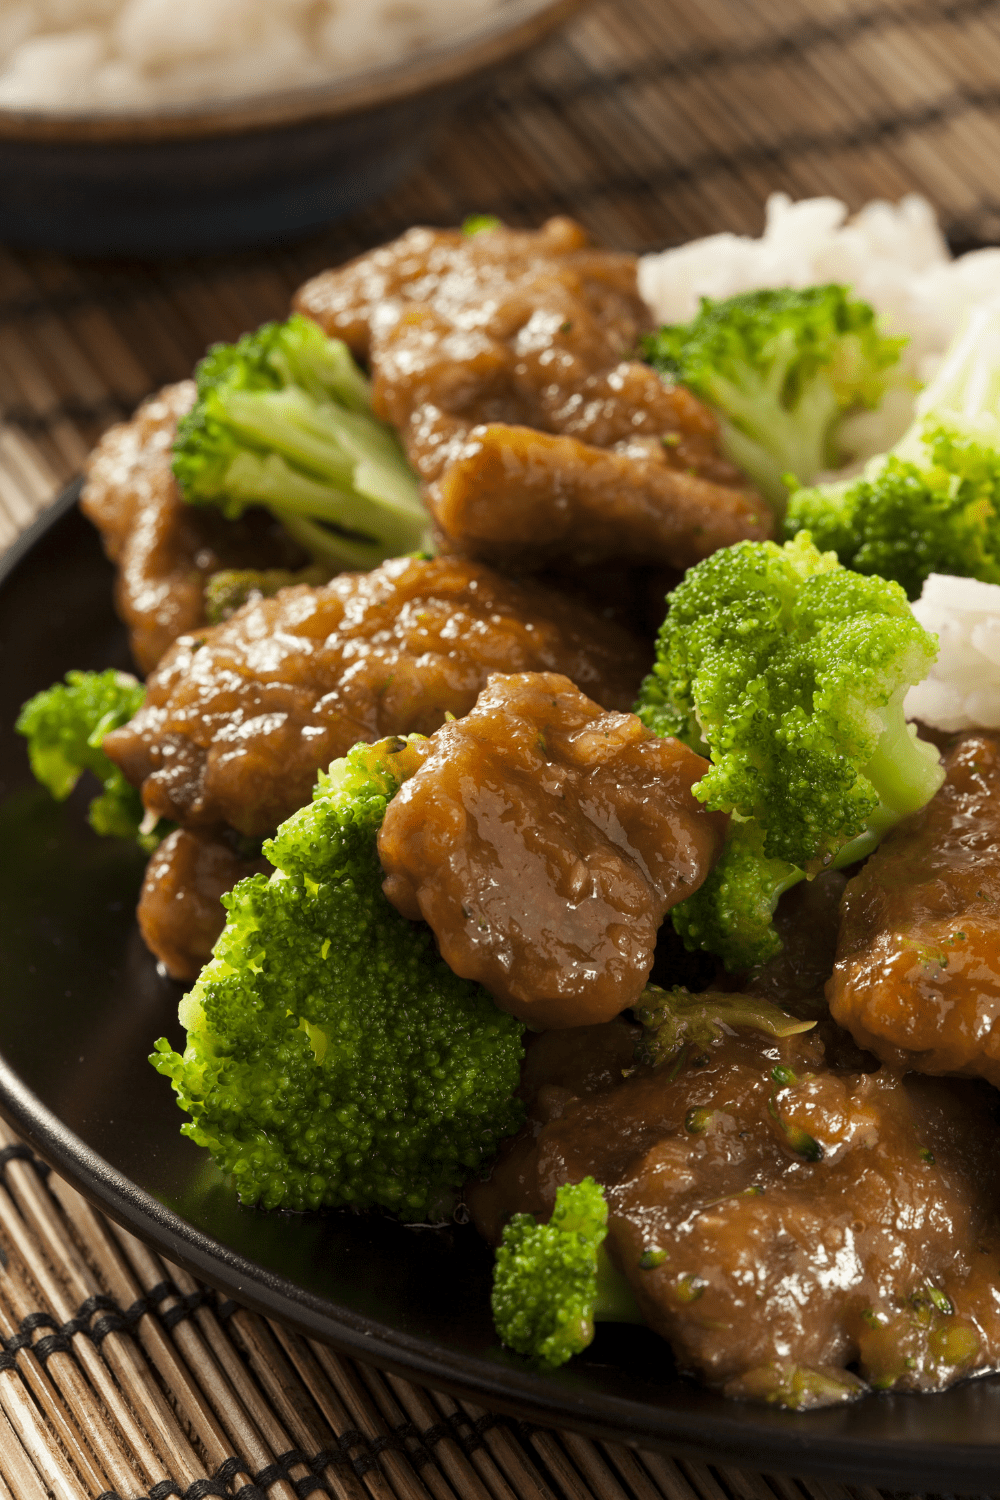 Homemade Beef Broccoli and Rice in a Black Plate